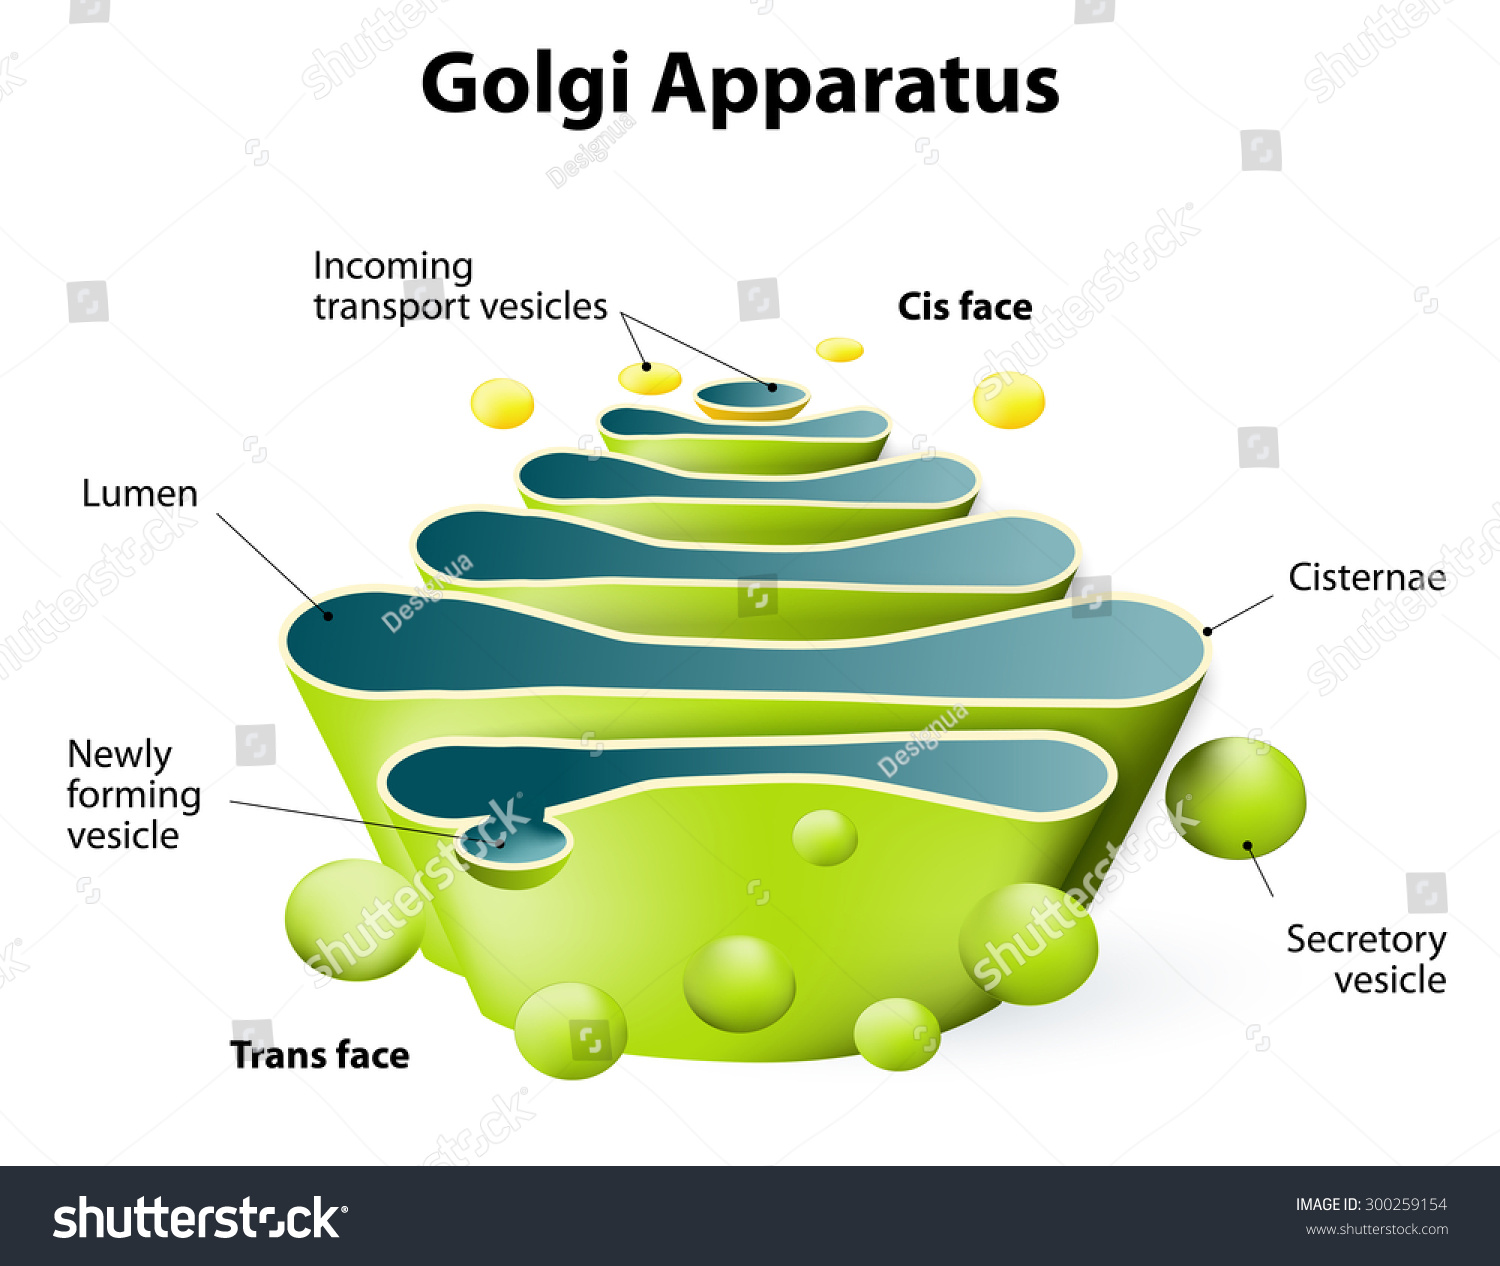 What are some facts about the Golgi apparatus?